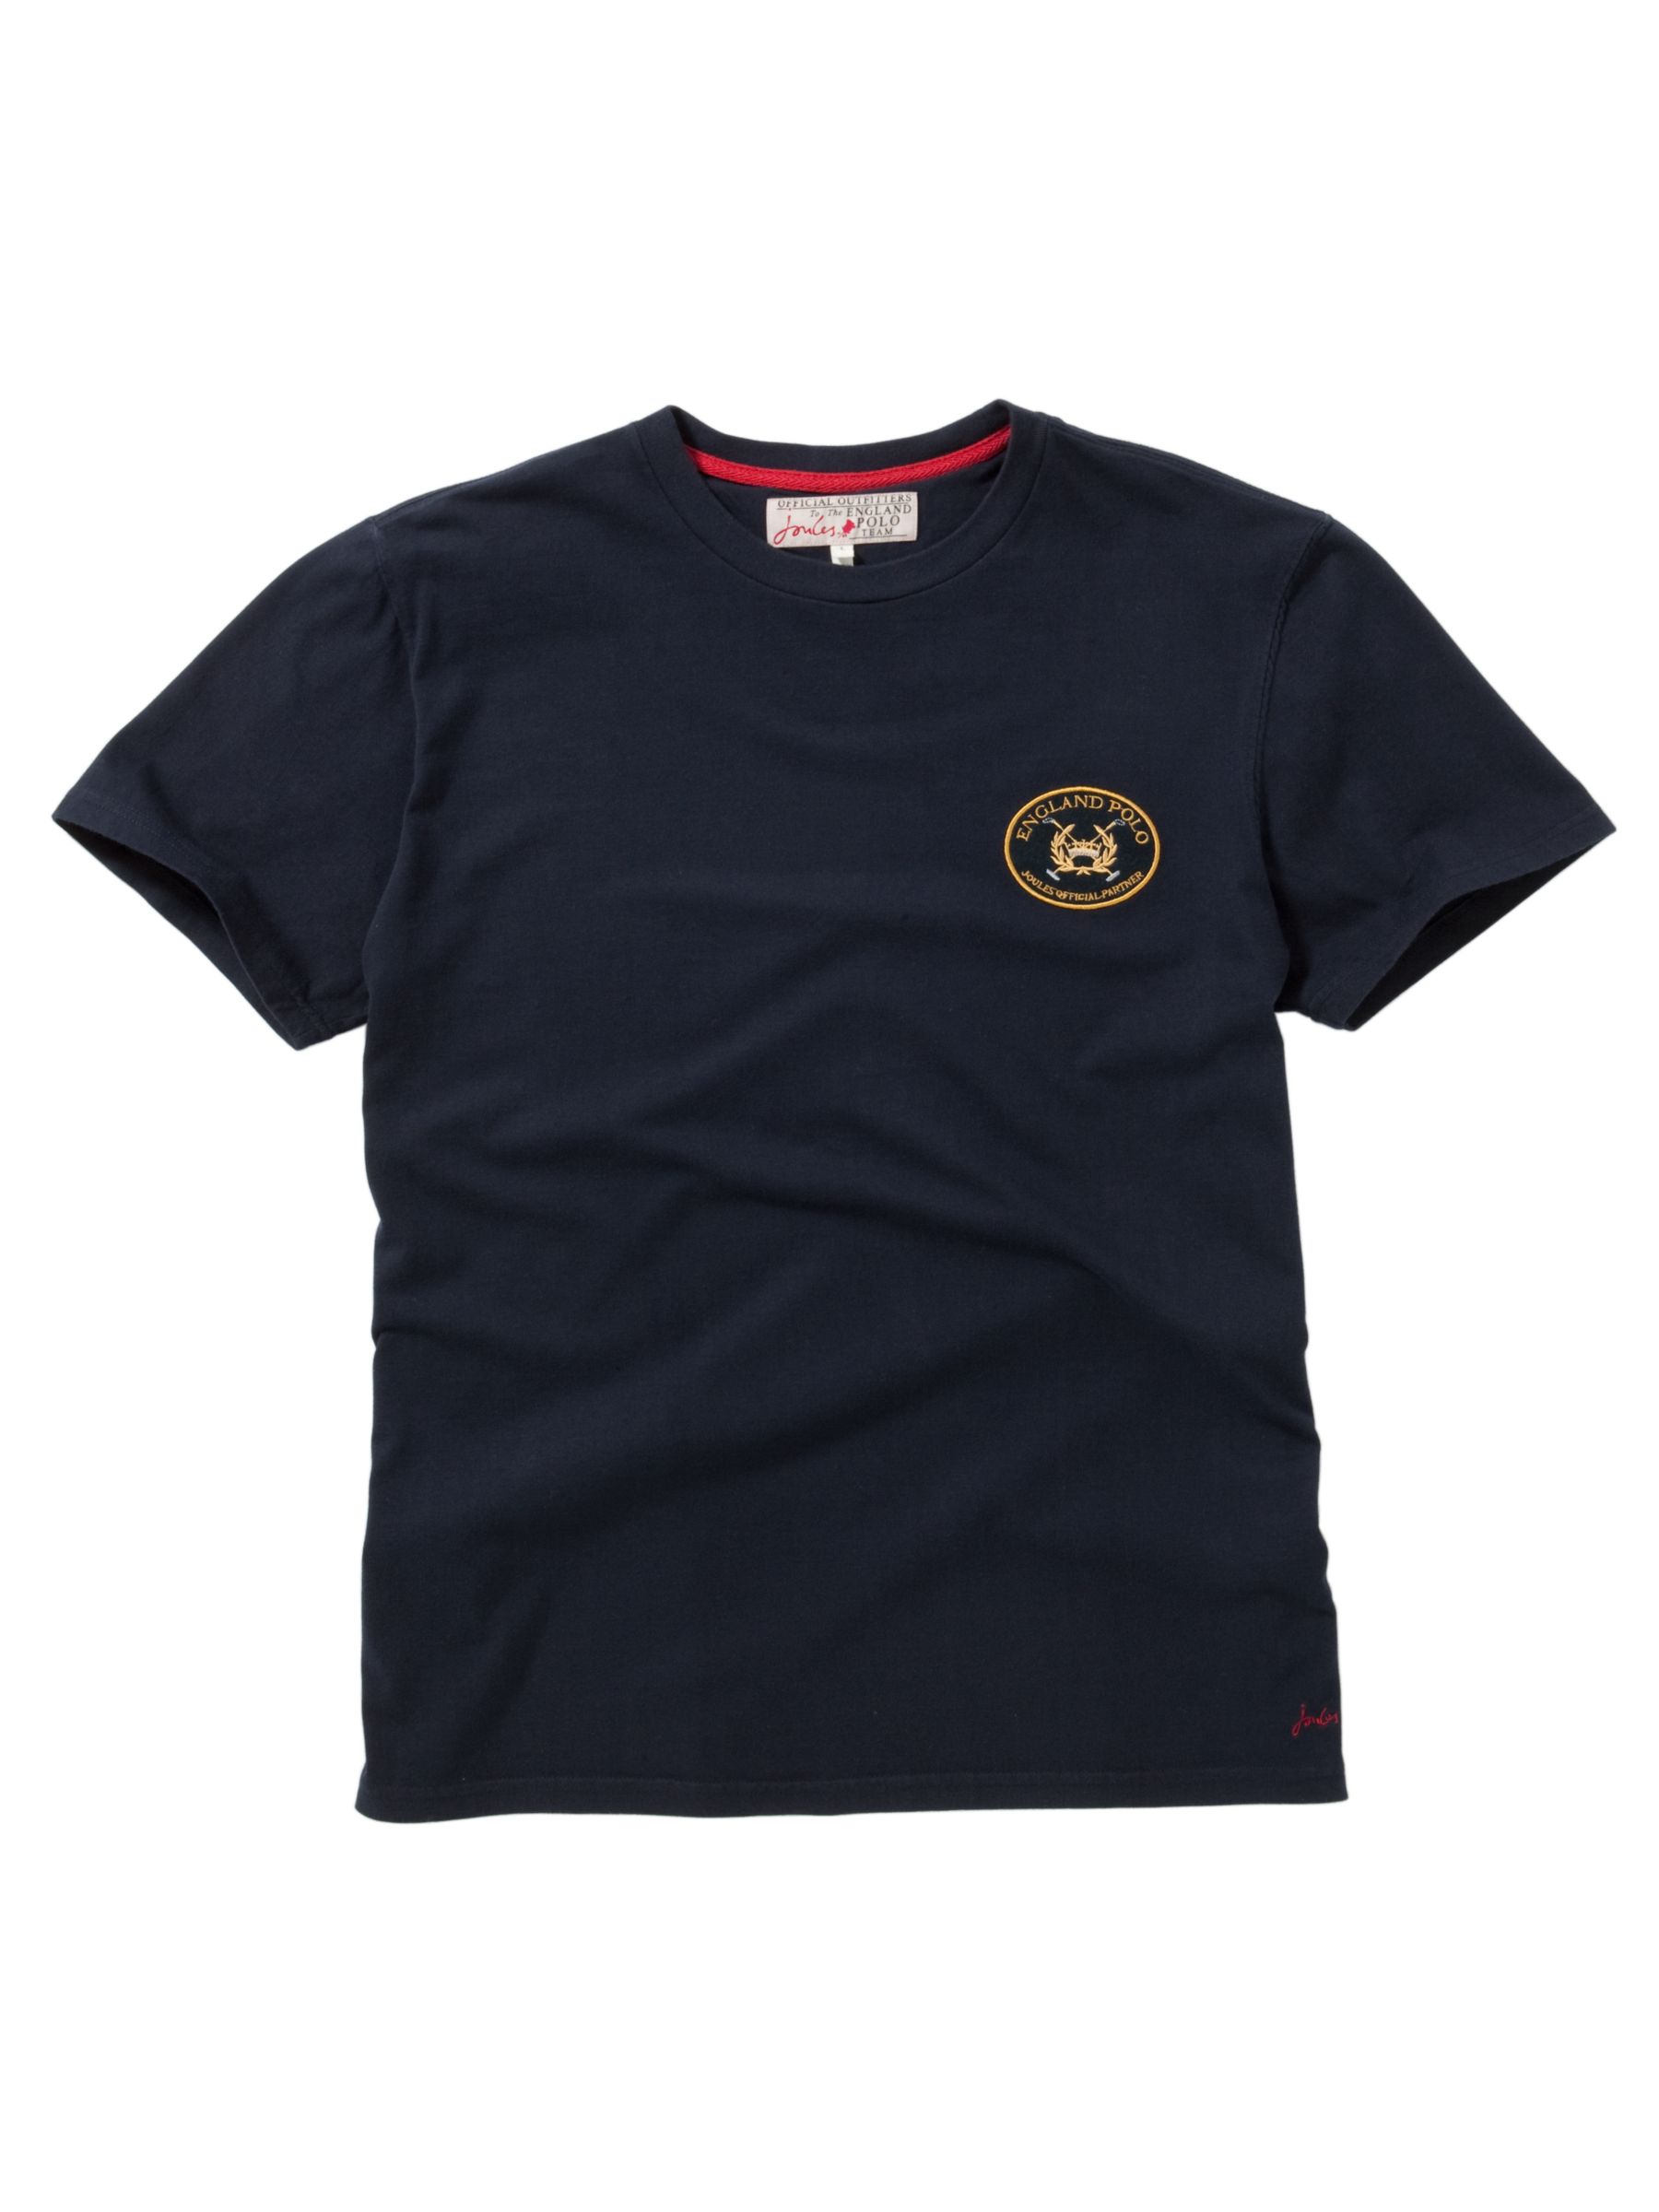 Joules England Polo T-Shirt, Navy